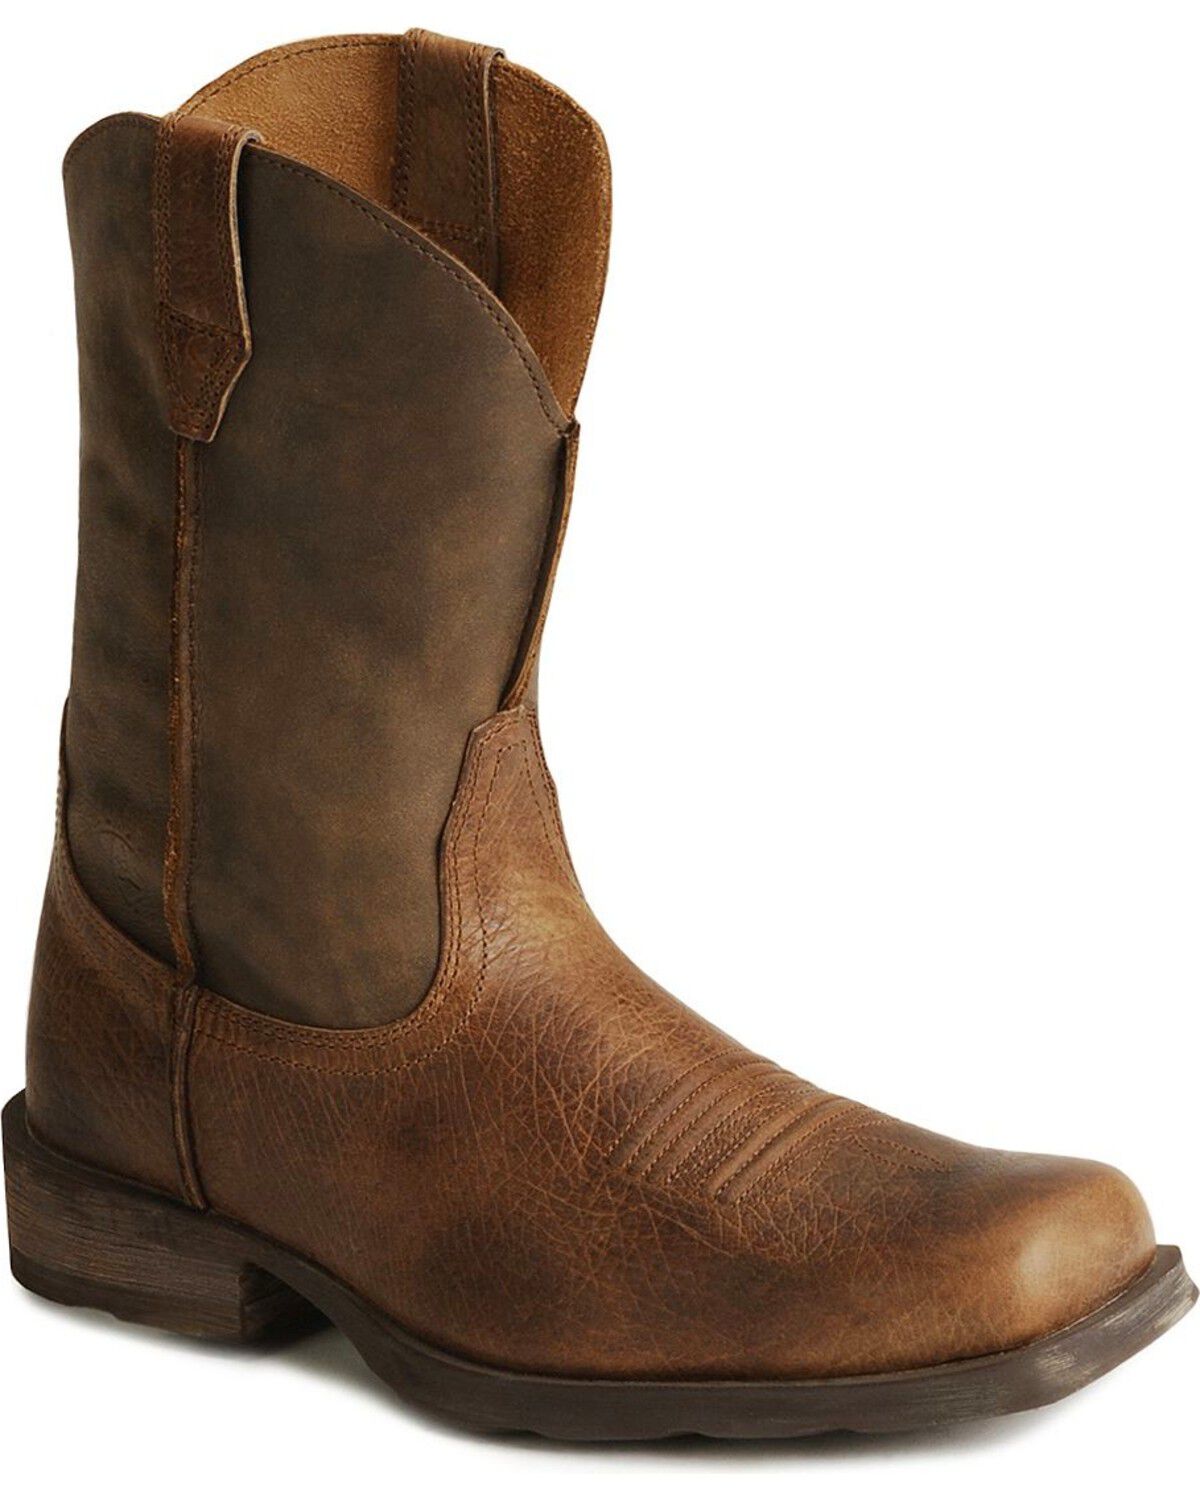 Men's Casual Boots - Boot Barn